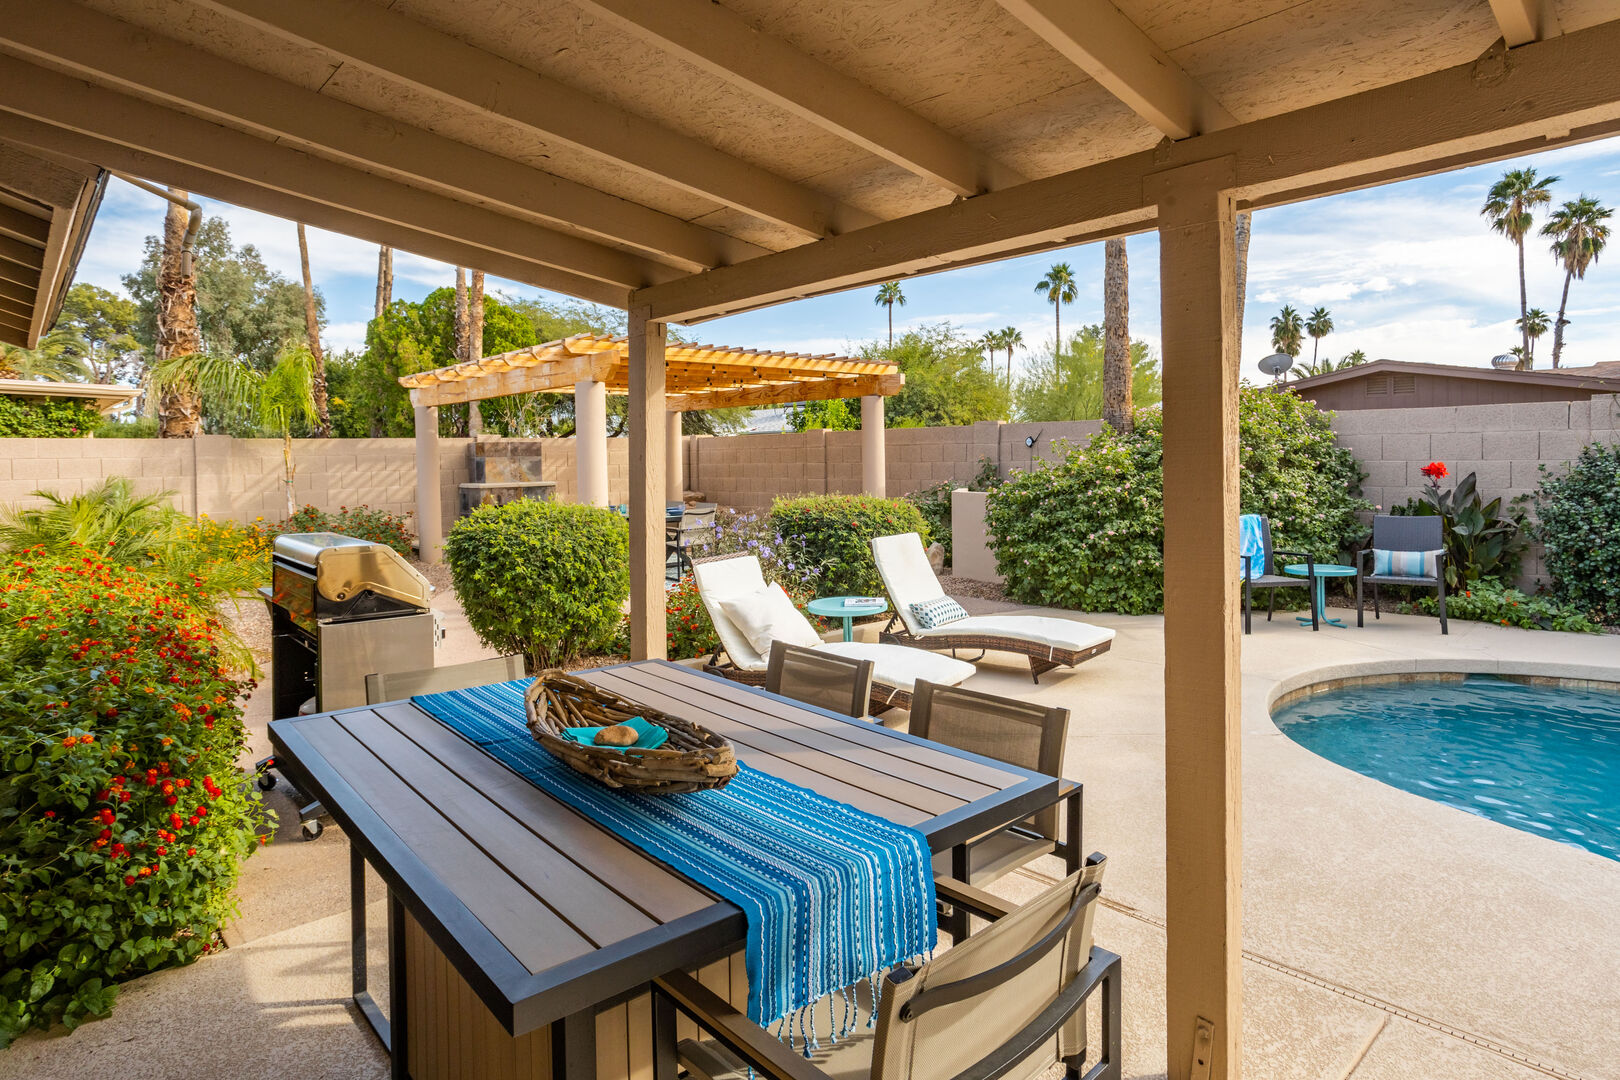 Sheltered Outdoor Dining w/ Grill & Pool in Background